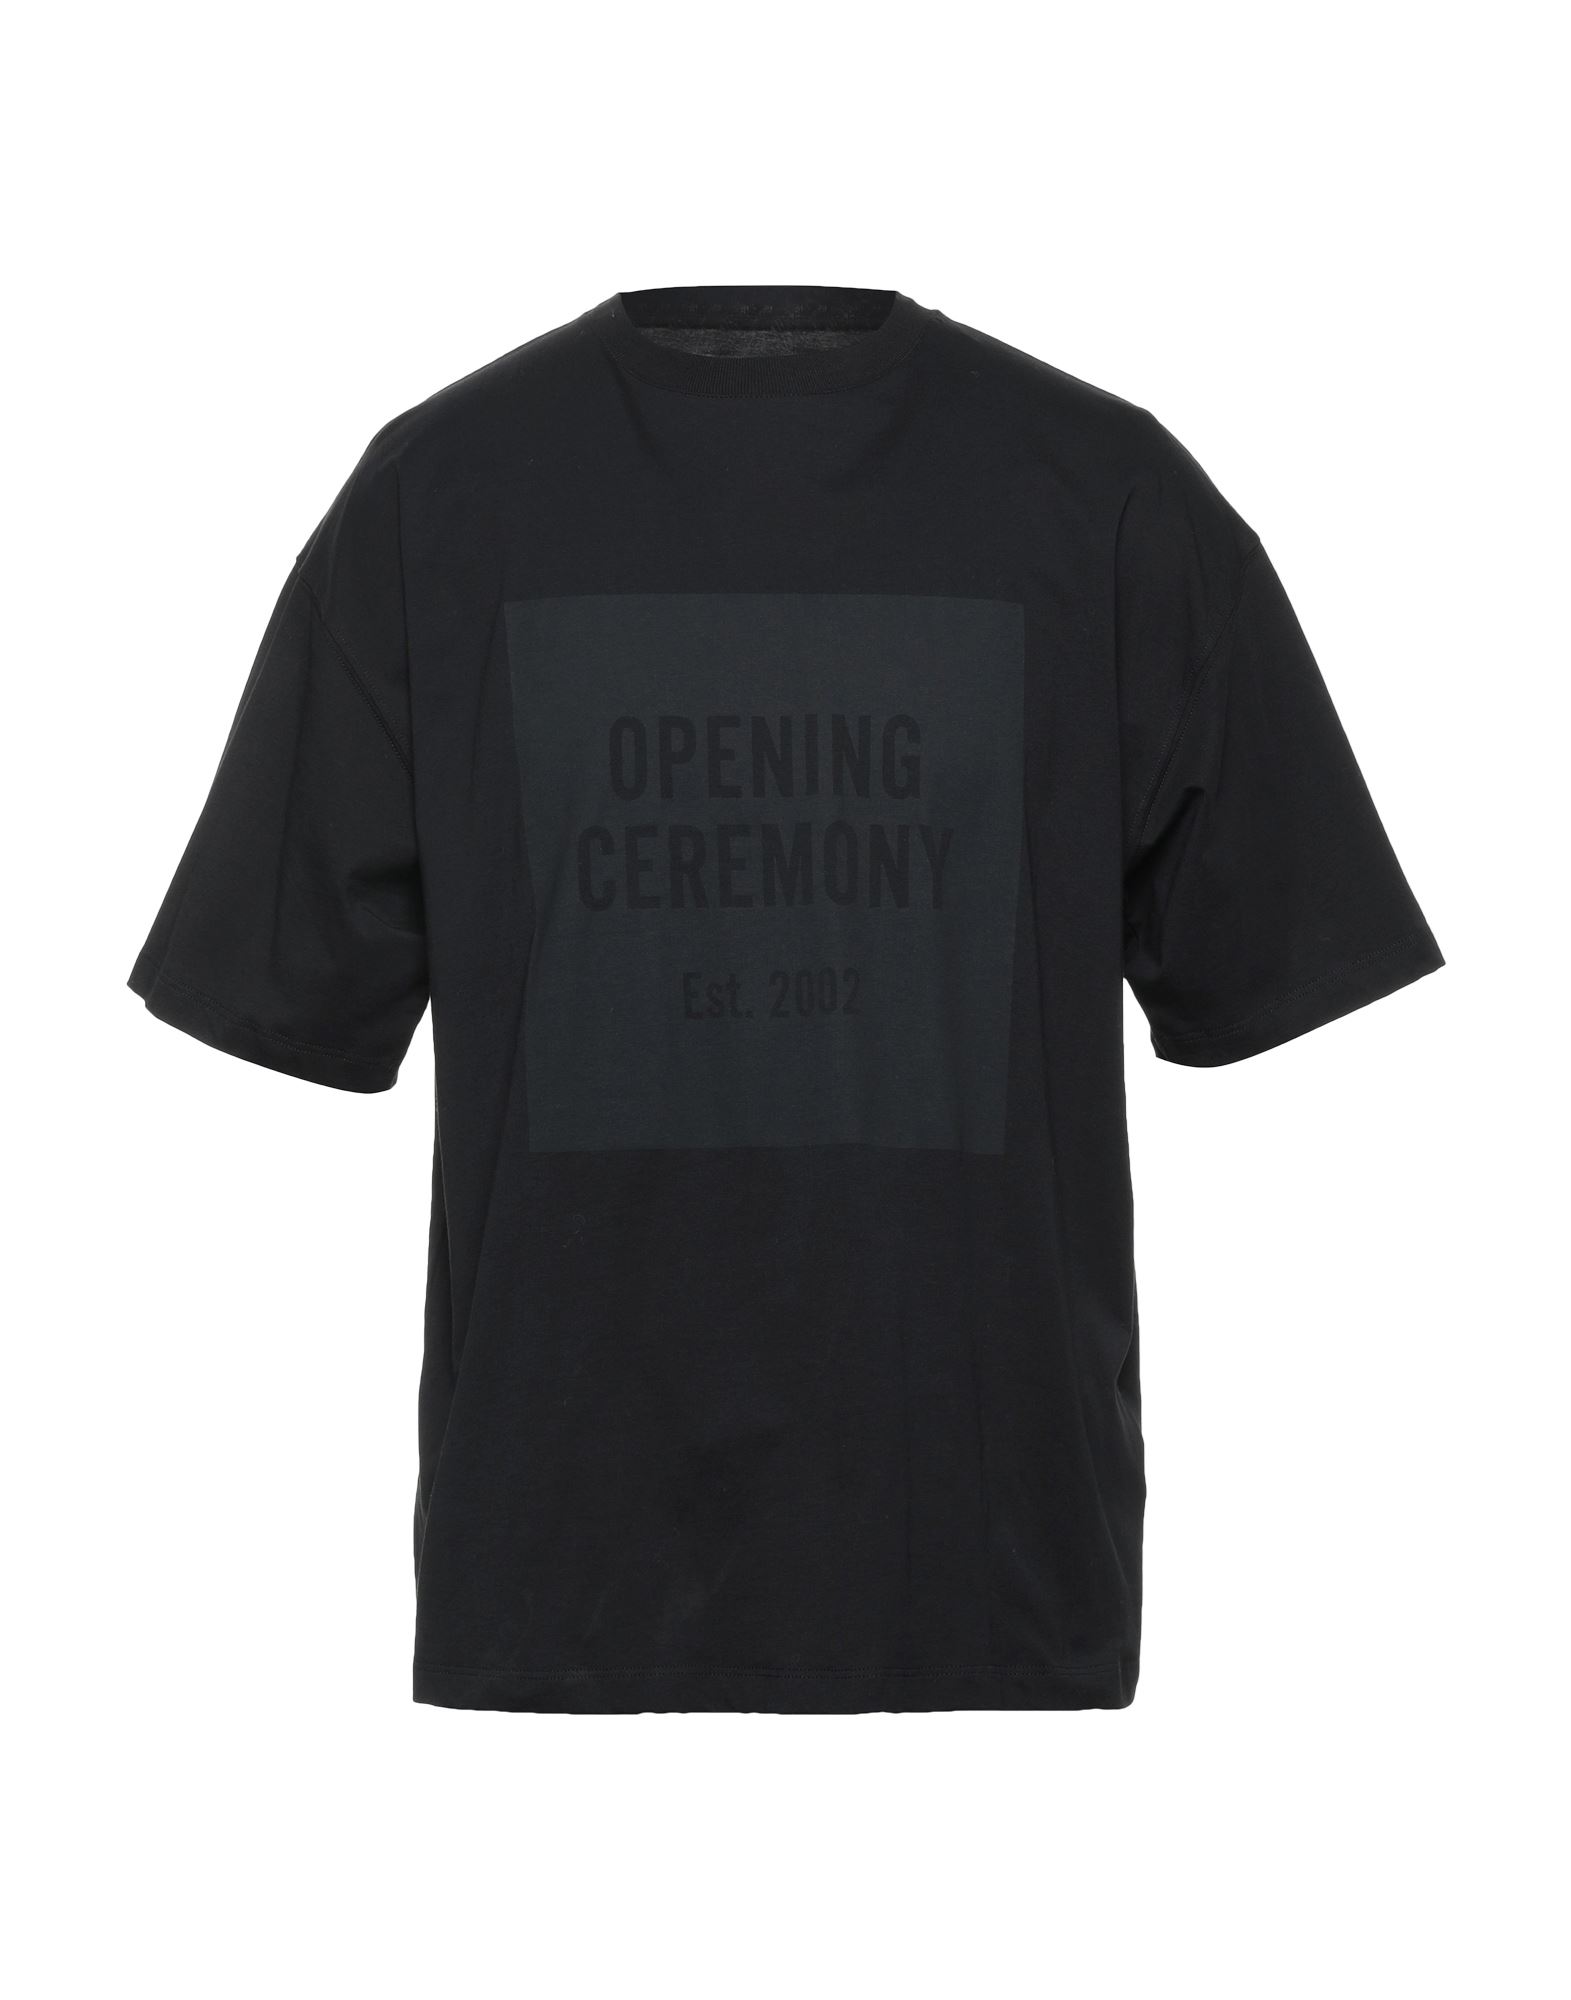 OPENING CEREMONY OPENING CEREMONY MAN T-SHIRT BLACK SIZE XS COTTON